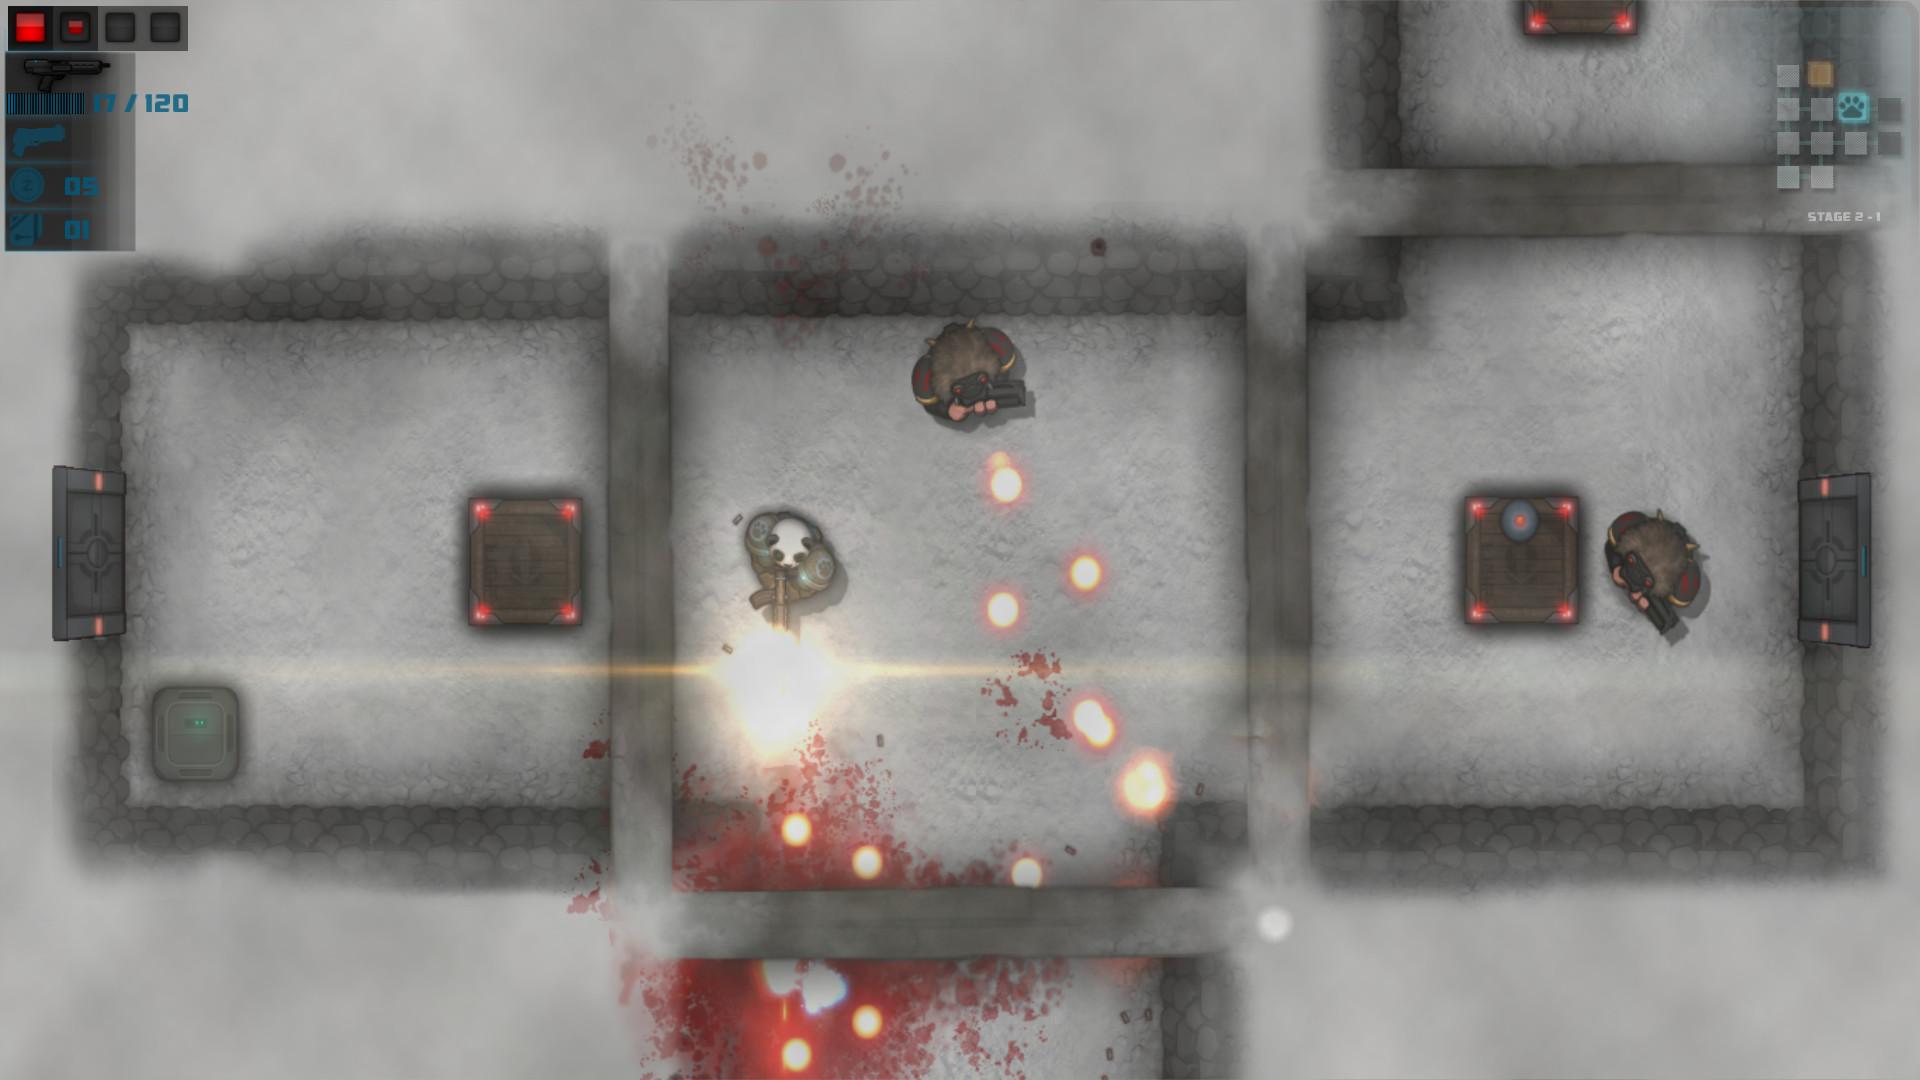 Screenshot №8 from game Feral Fury